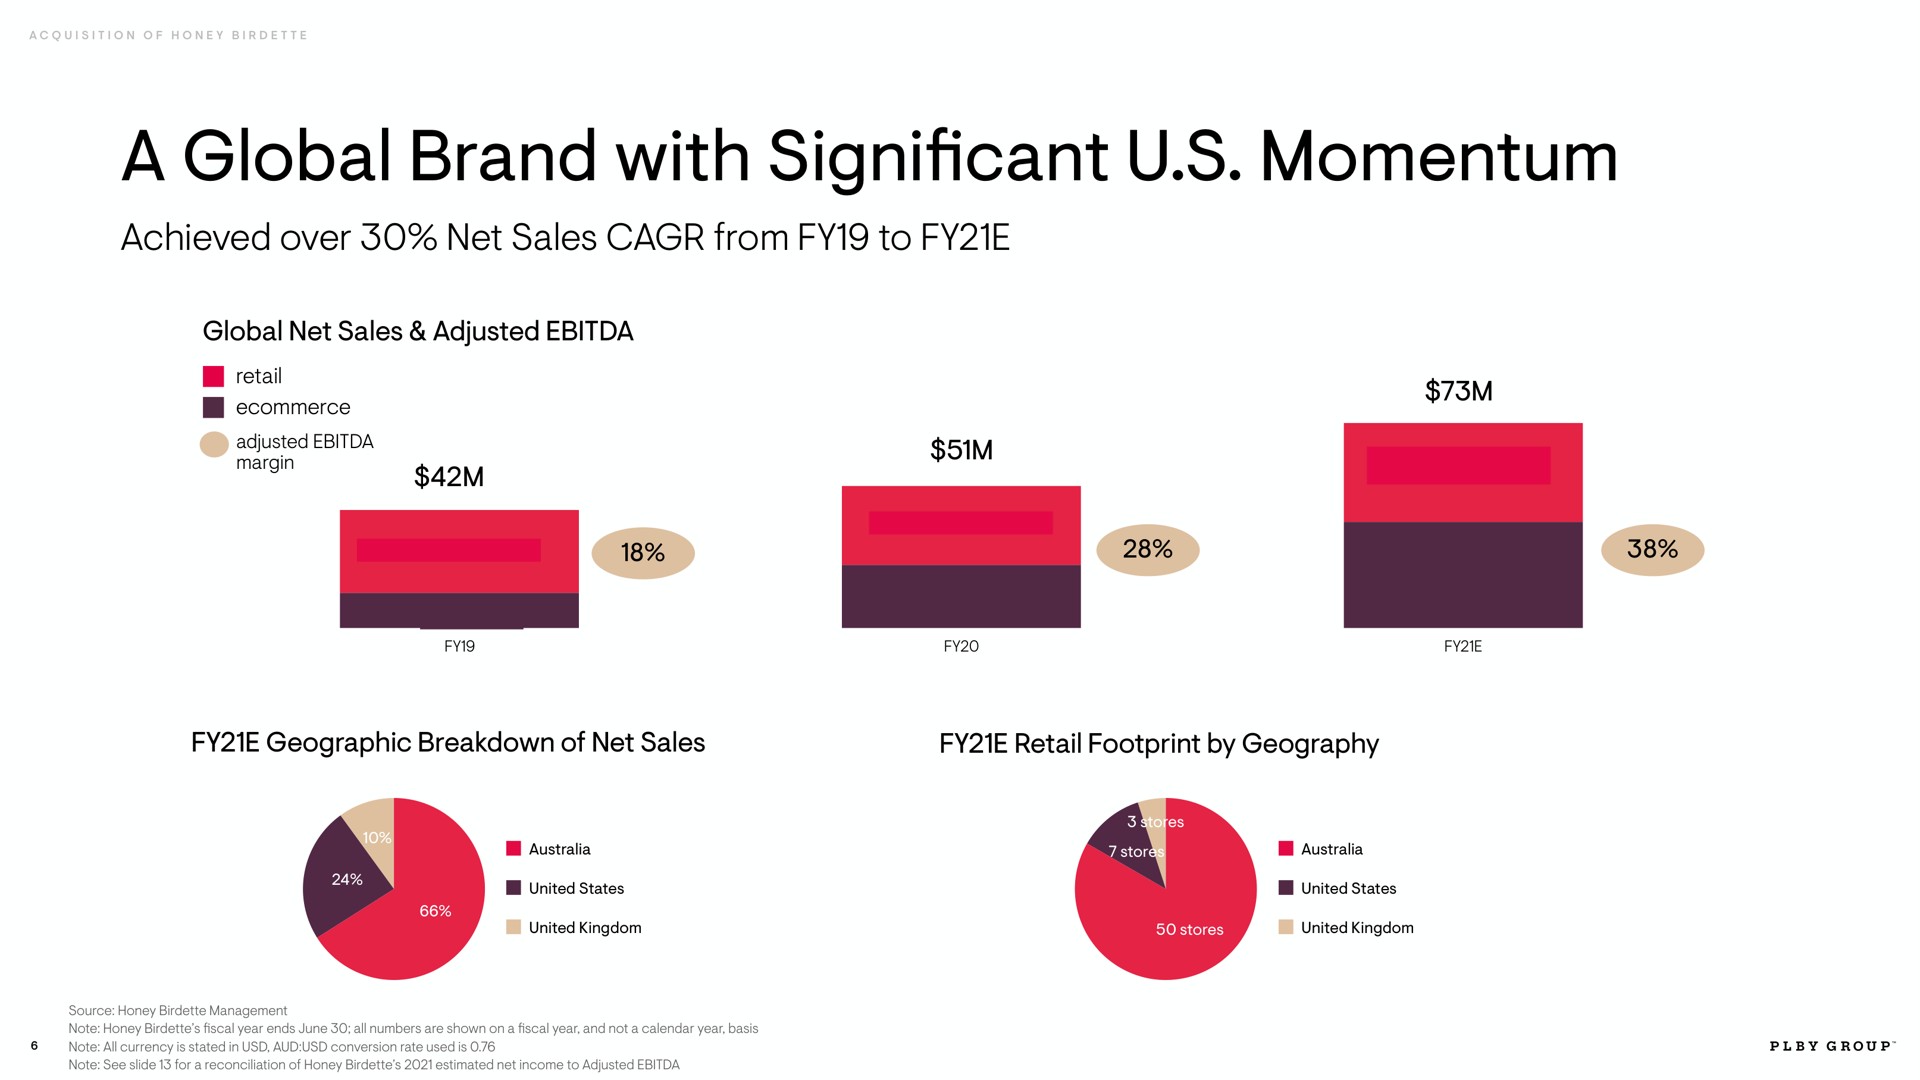 a global brand with significant momentum achieved over net sales from to global net sales adjusted retail adjusted margin geographic breakdown of net sales retail footprint by geography | Playboy